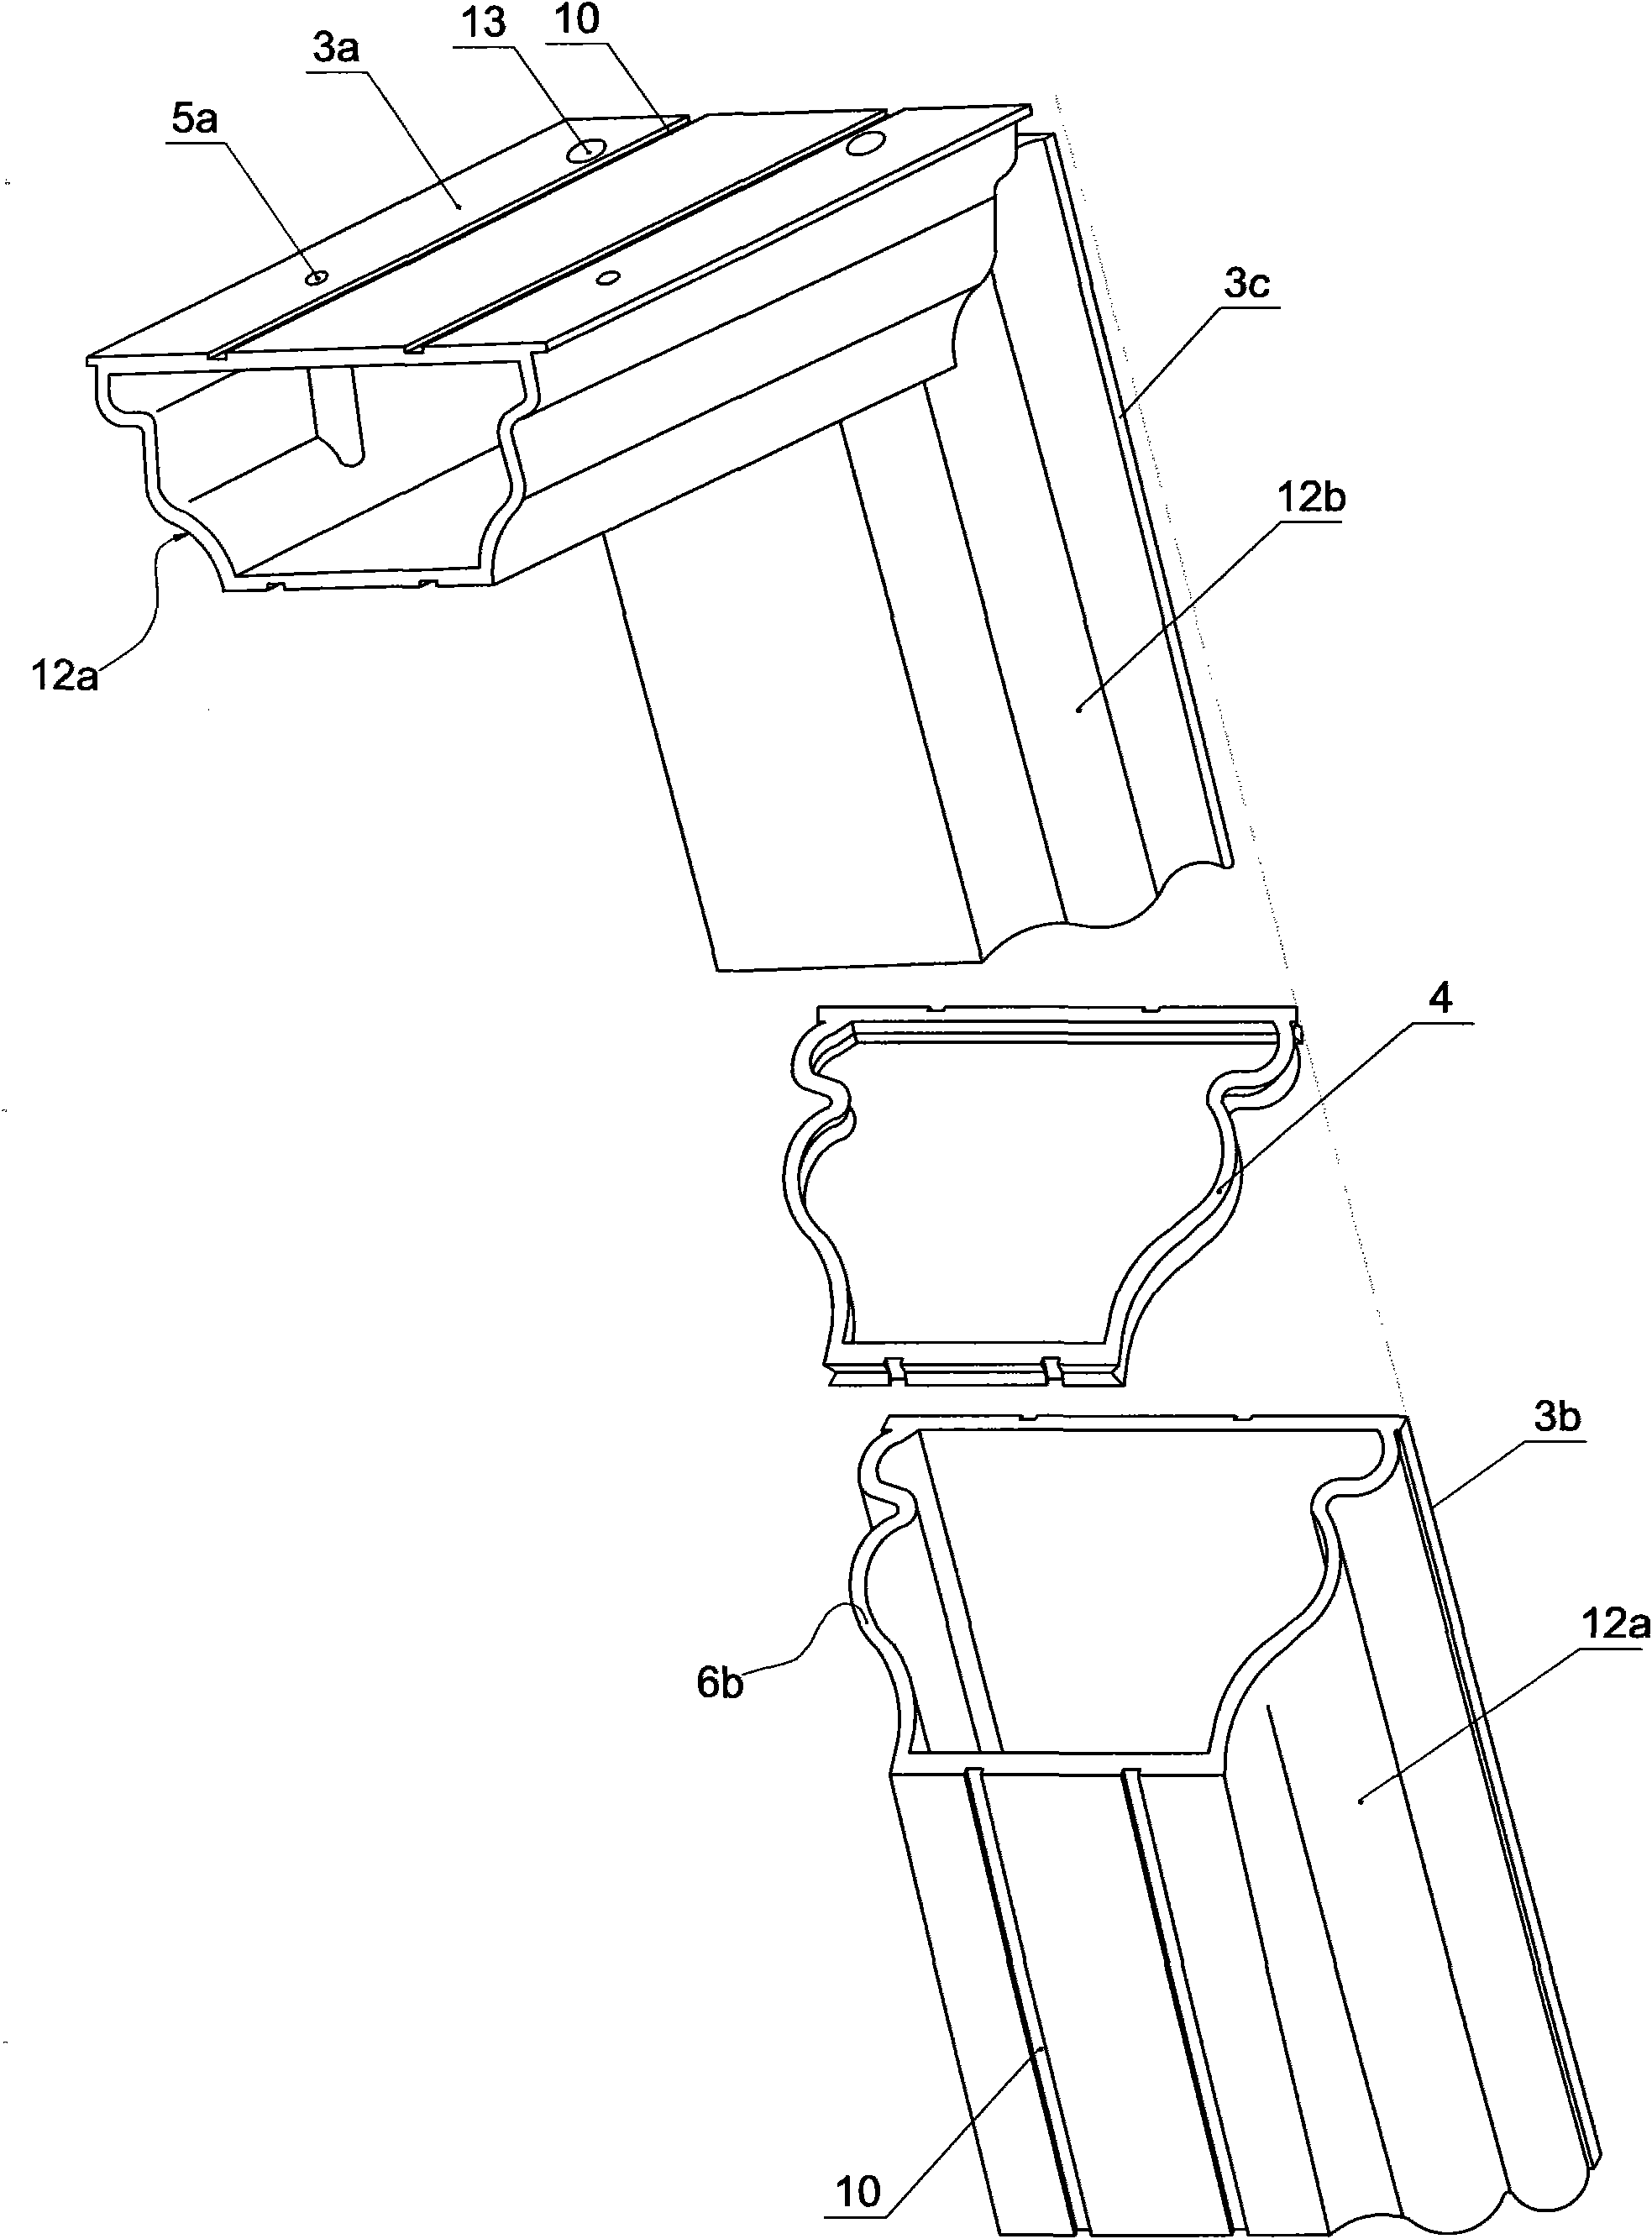 Waterproof connecting angle of windows and doors in building